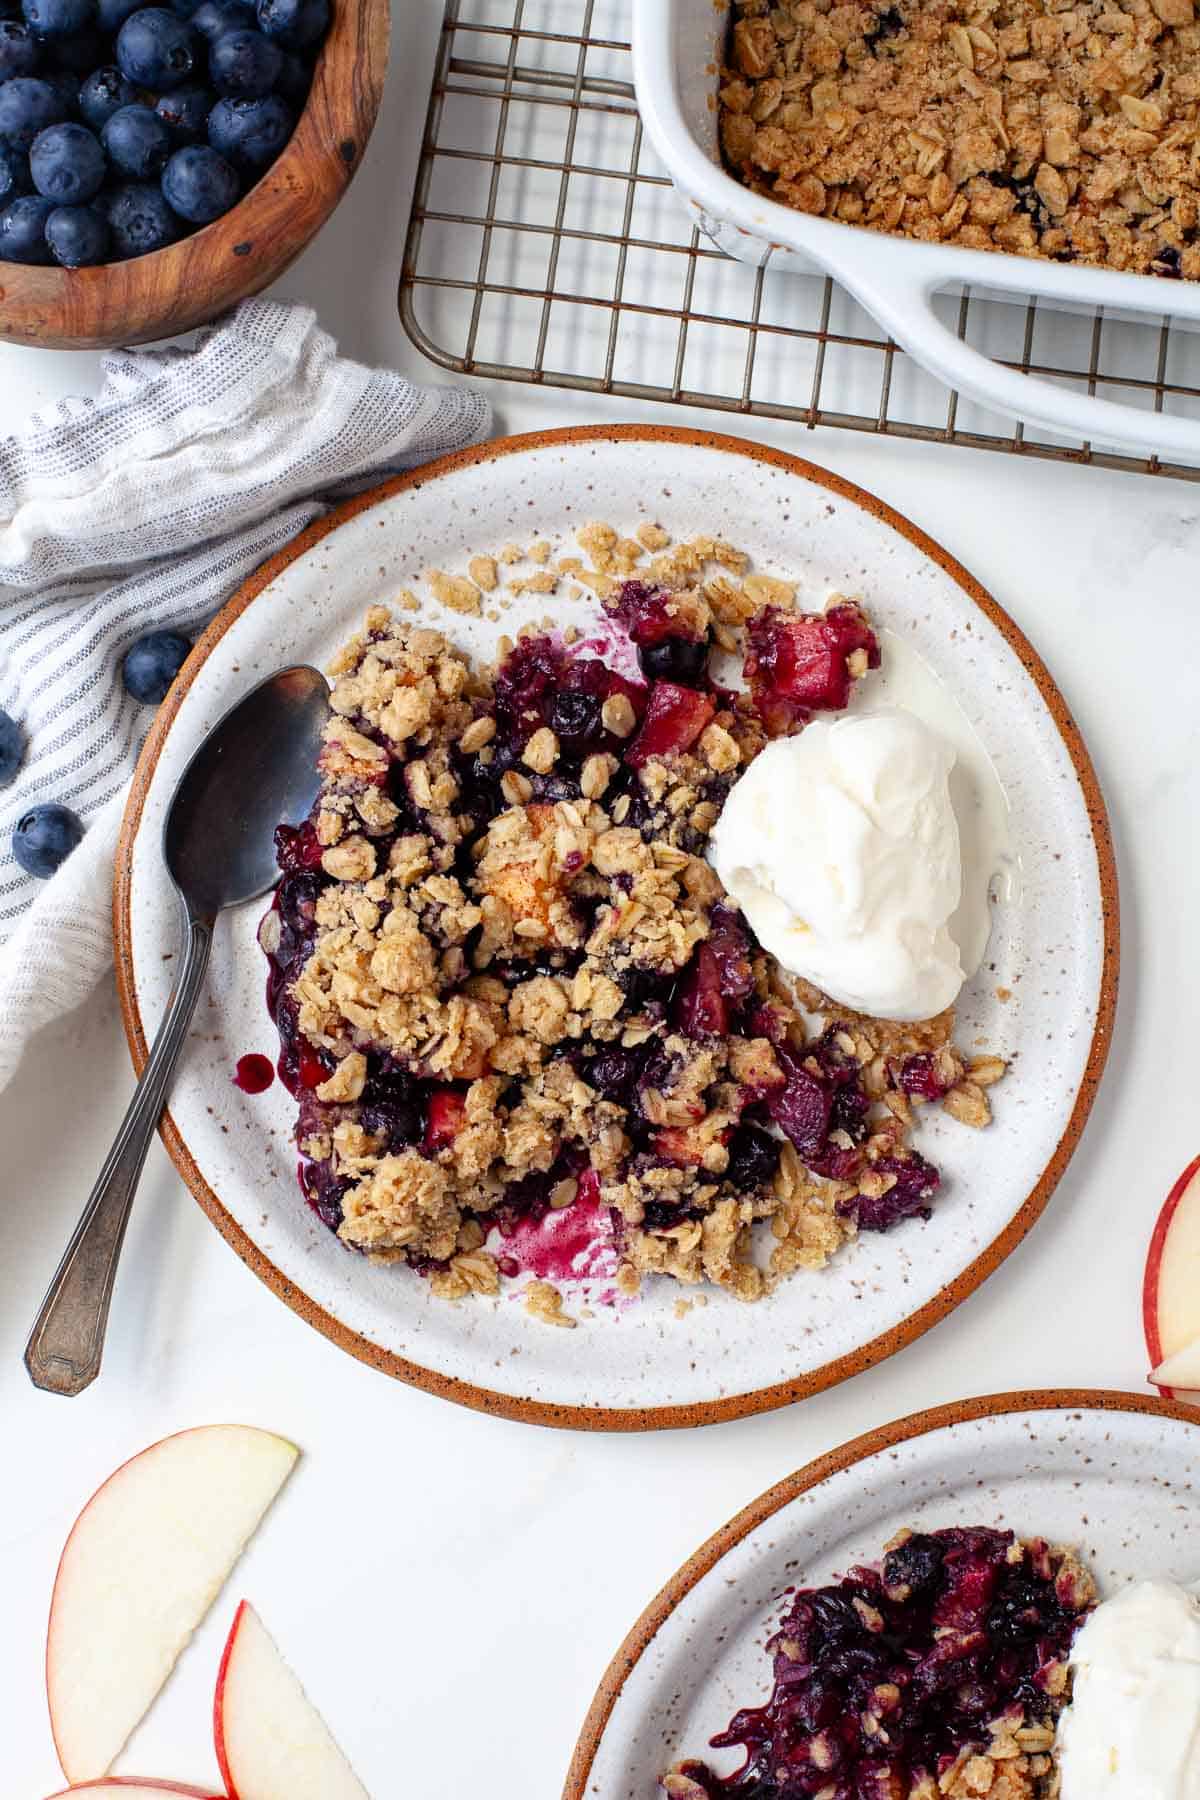 Two plates of blueberry apple crisp served with vanilla ice cream next to baking dish with crisp